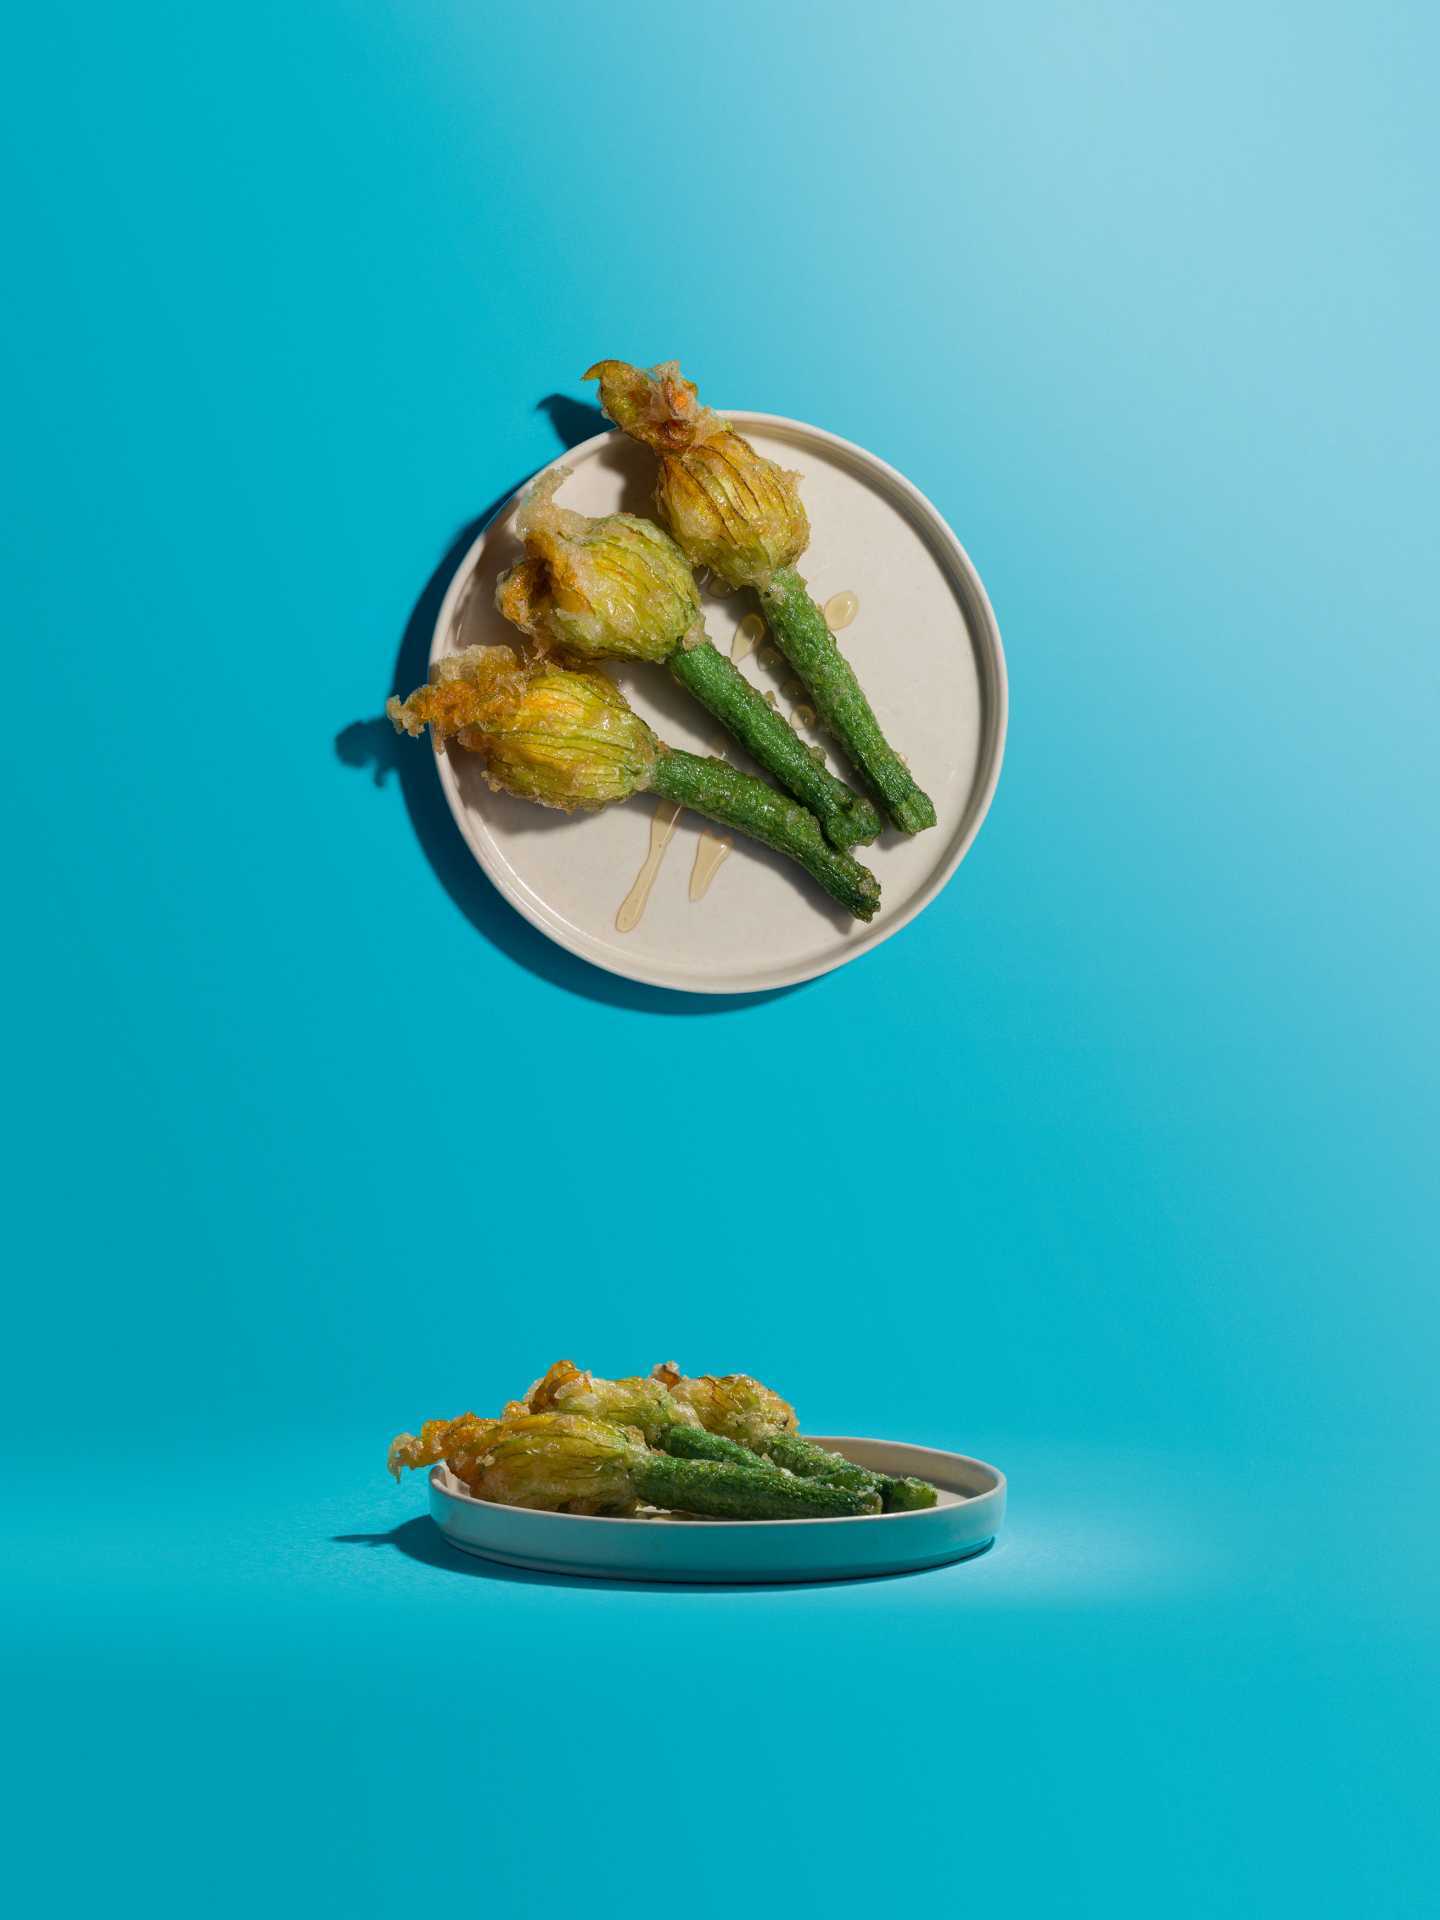 Ben Tish's courgette flowers